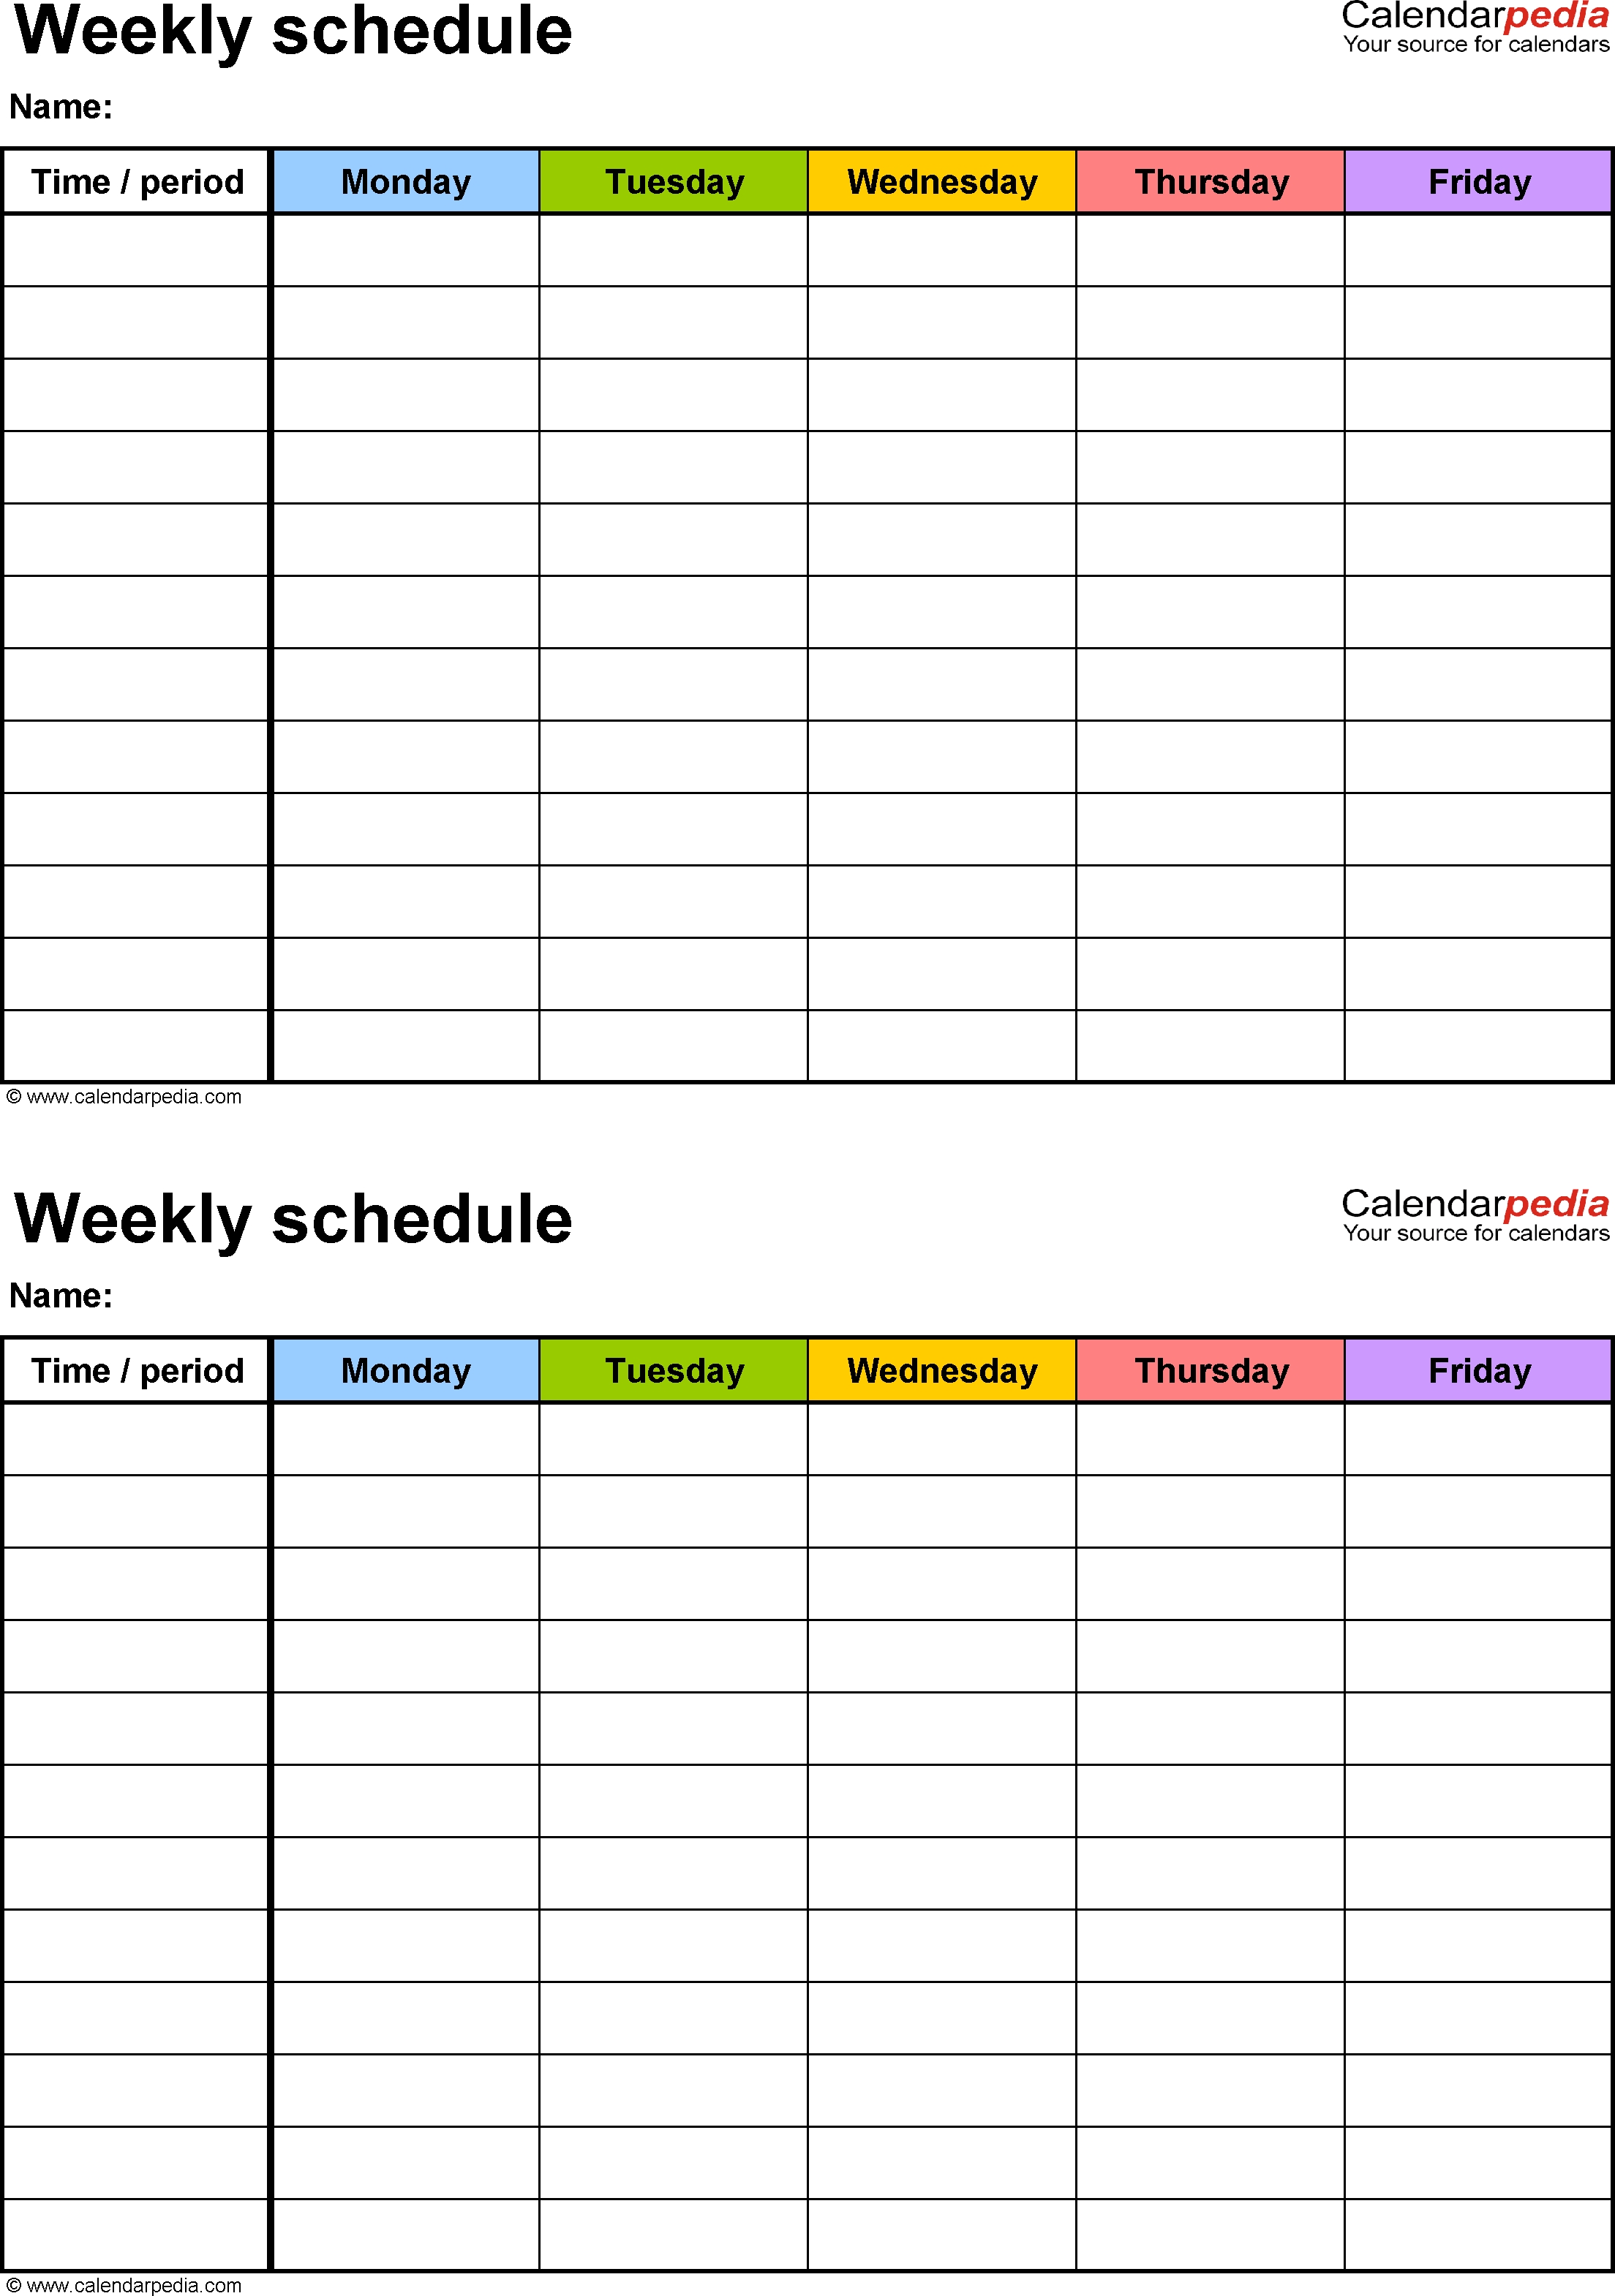 Free Weekly Schedule Templates For Word - 18 Templates-7 Week Calendar Template